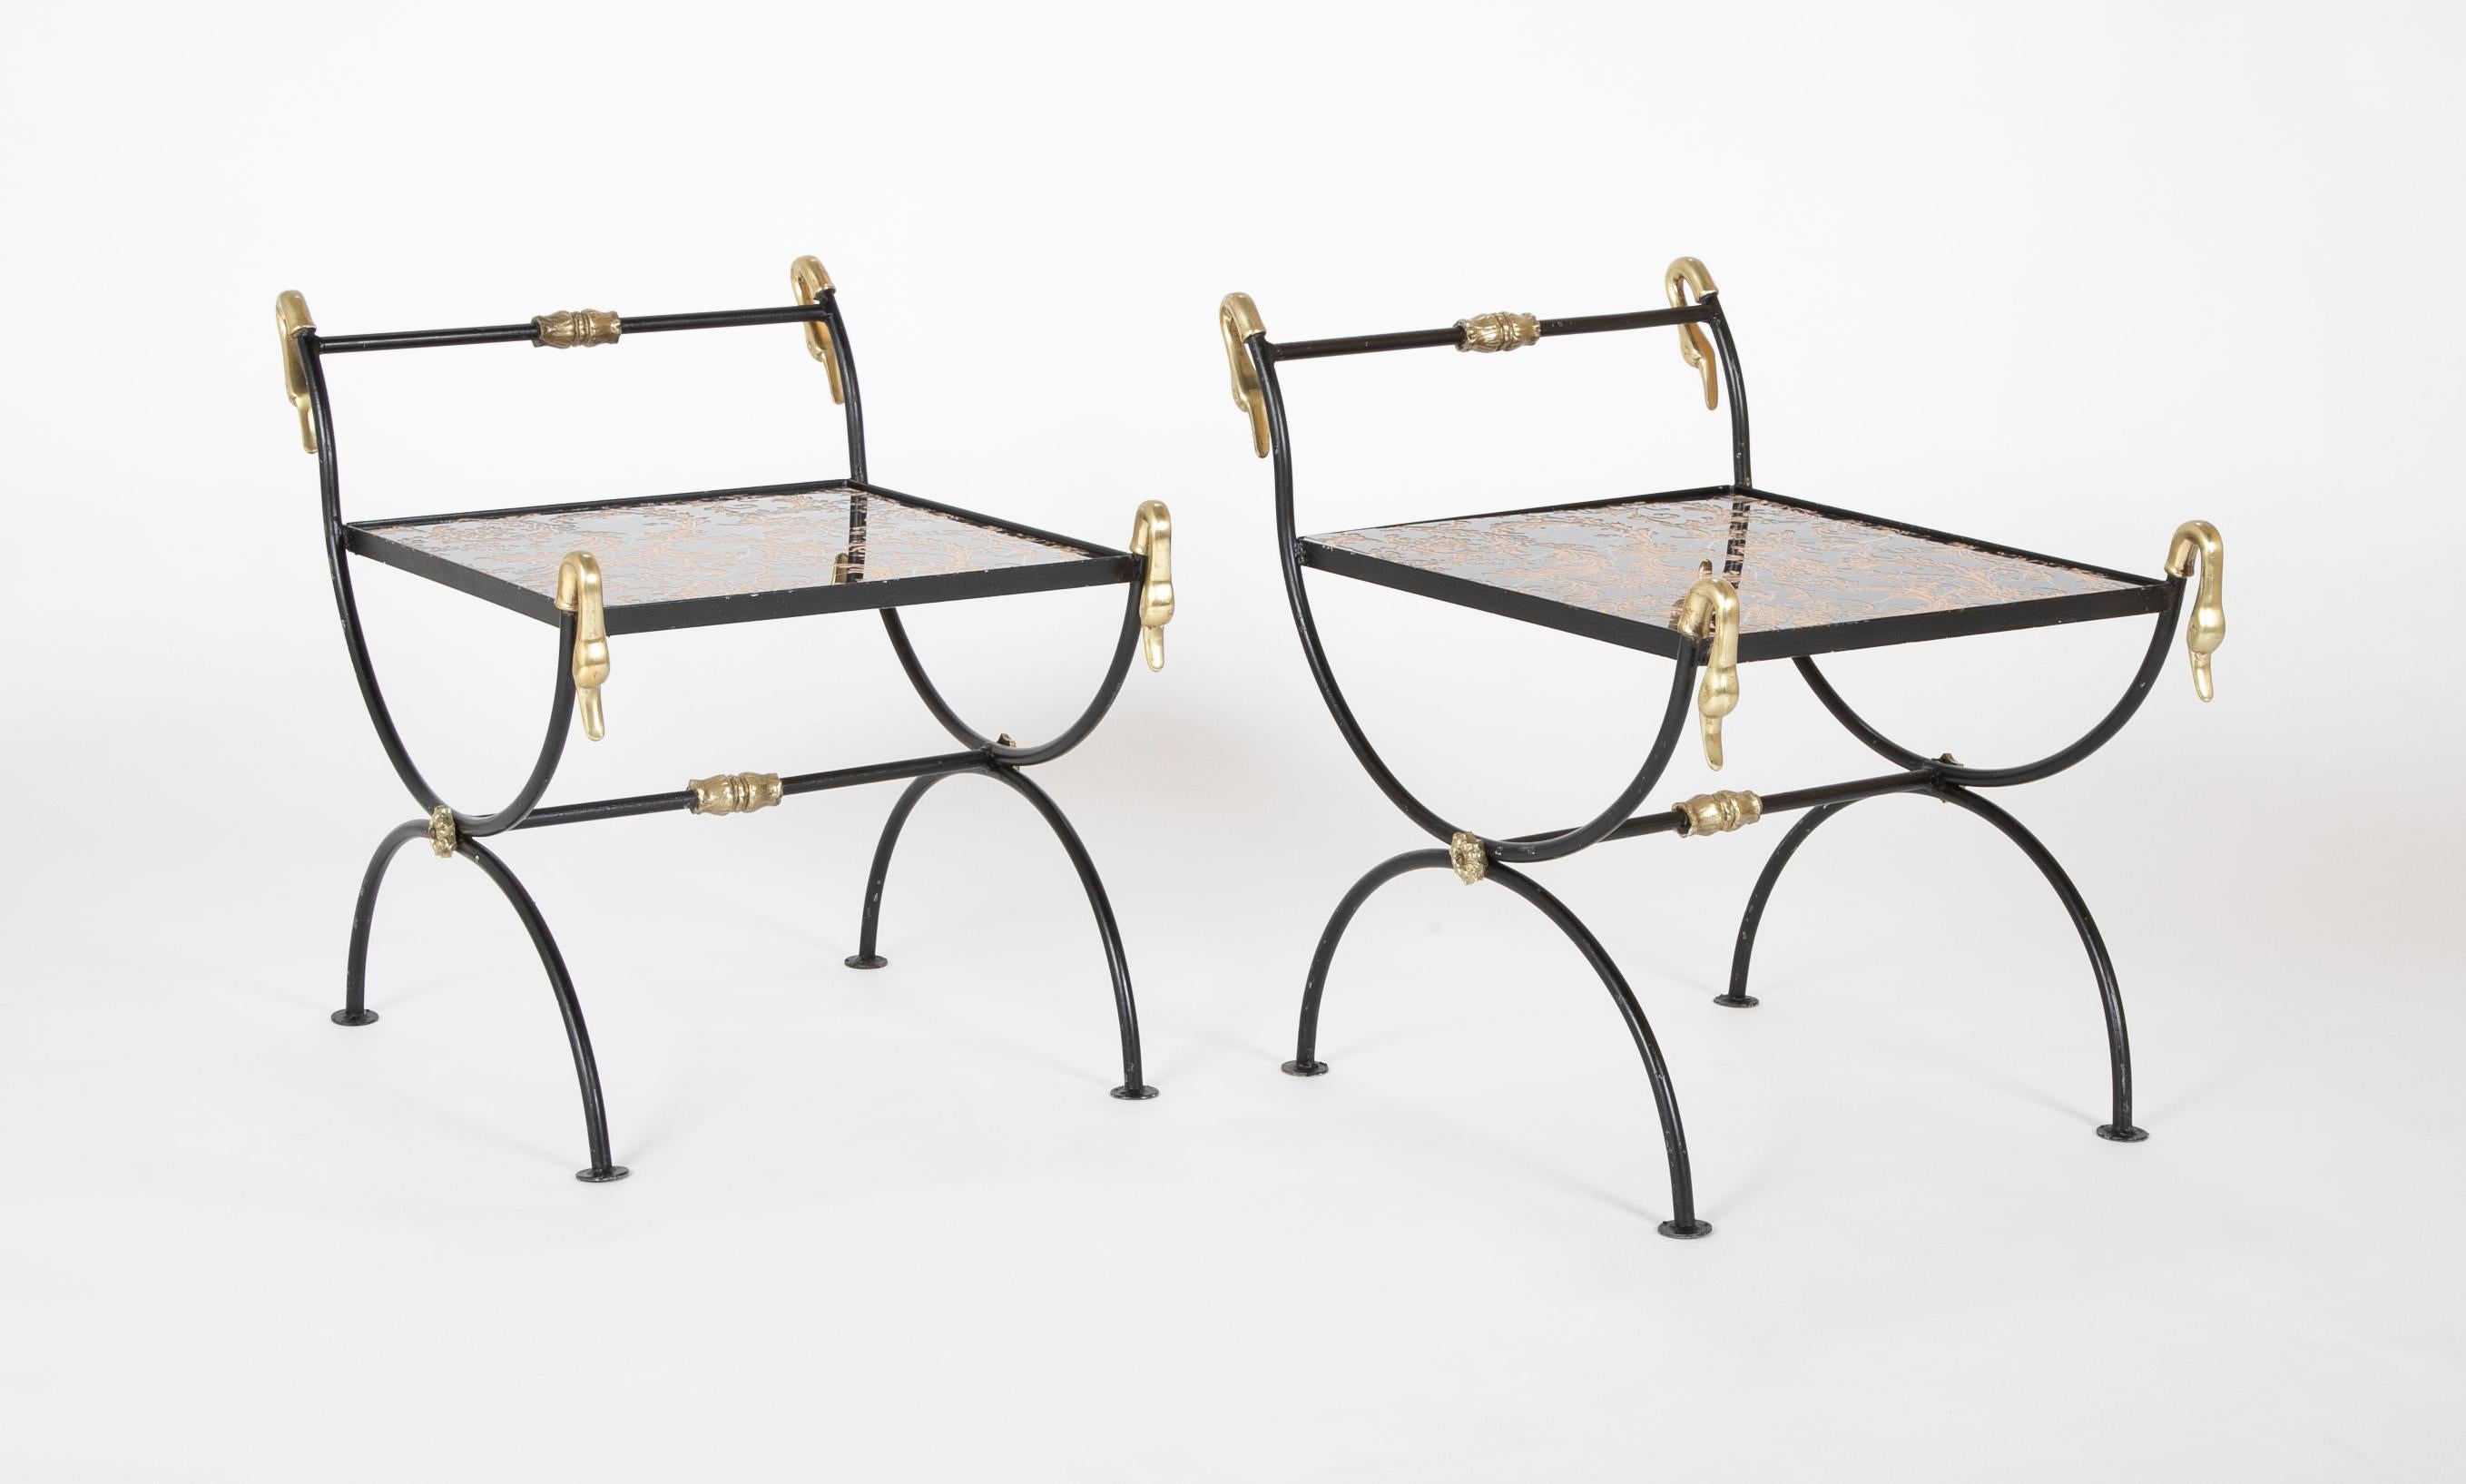 American Three Piece Iron and Brass Coffee Table with Versace Insets